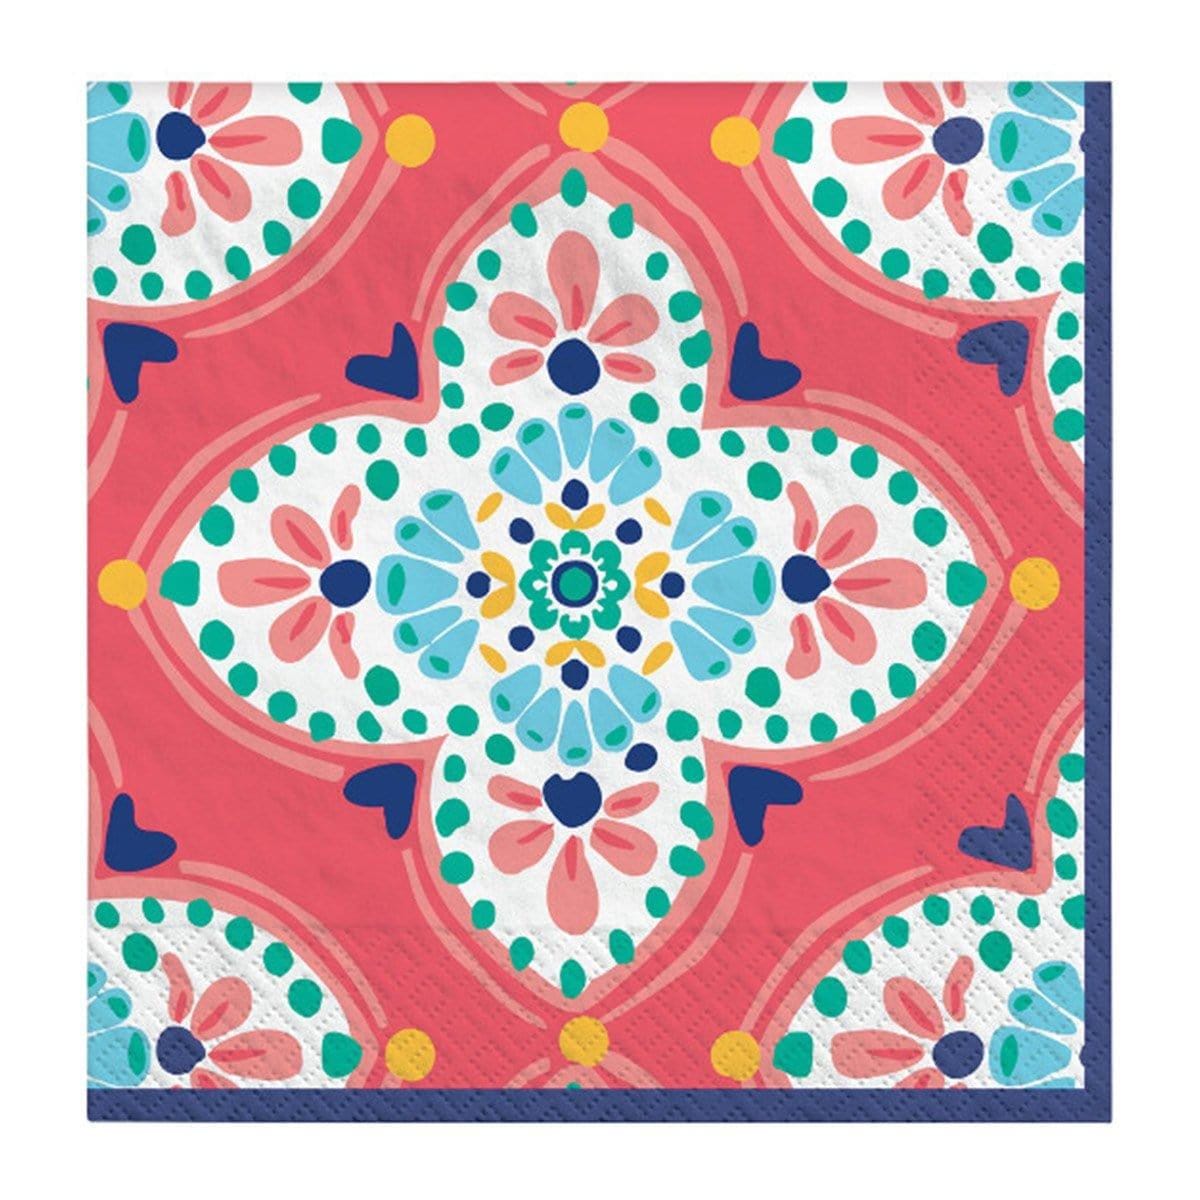 Buy Summer Boho Vibes beverage napkins, 16 per package sold at Party Expert